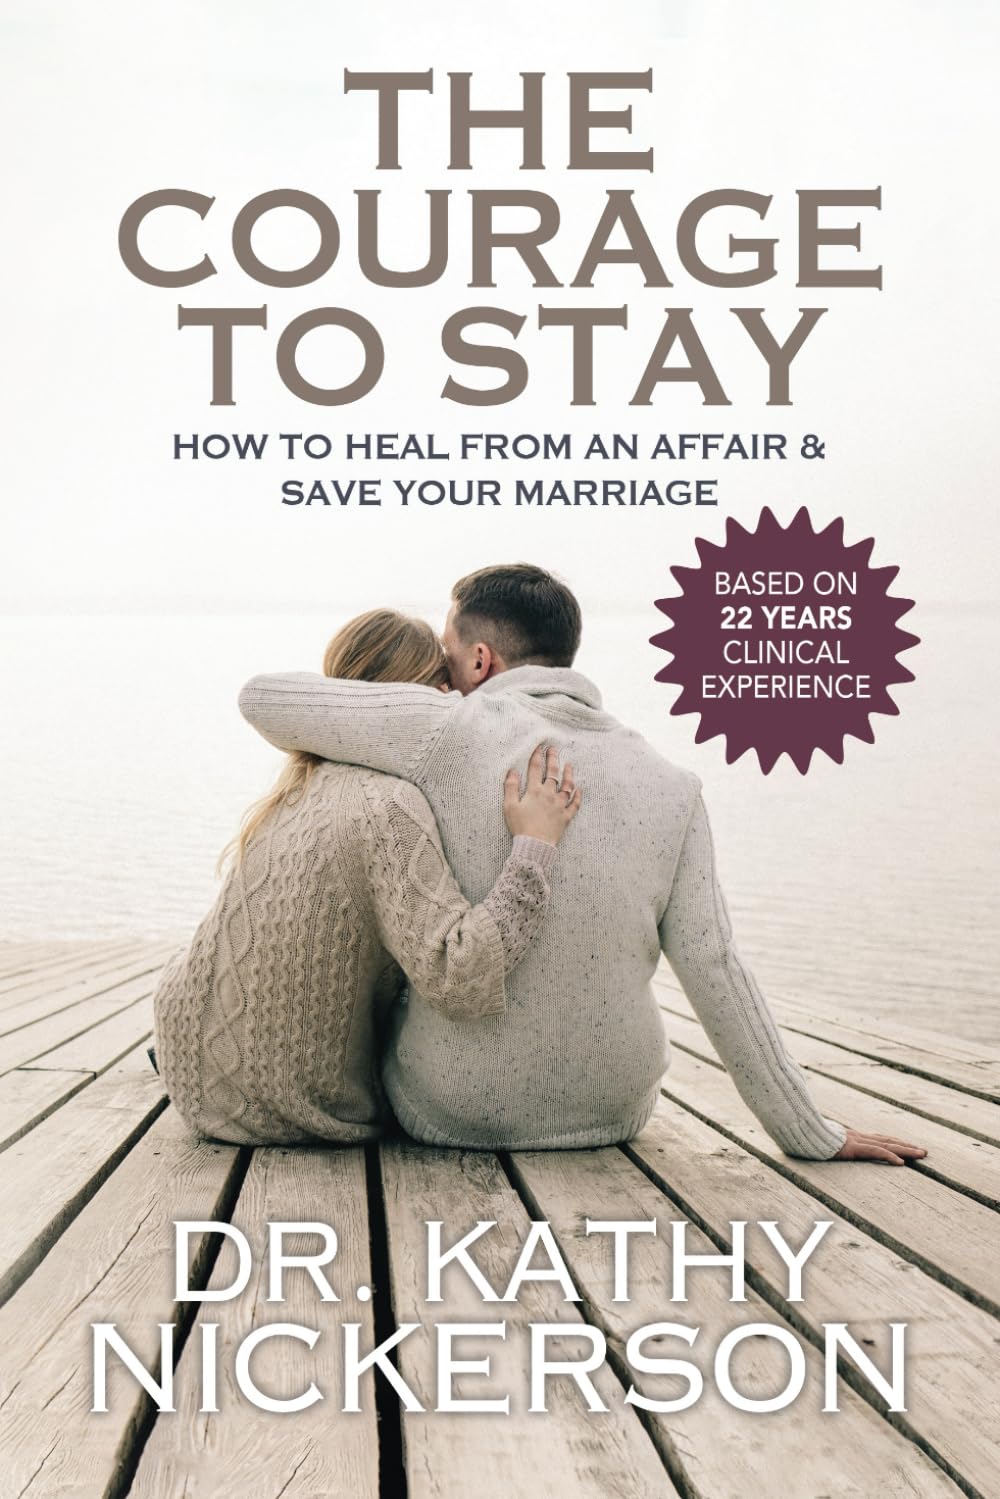 The Courage To Stay Book Recommended By Briana Lefman at Hamsa Healing Space - Book